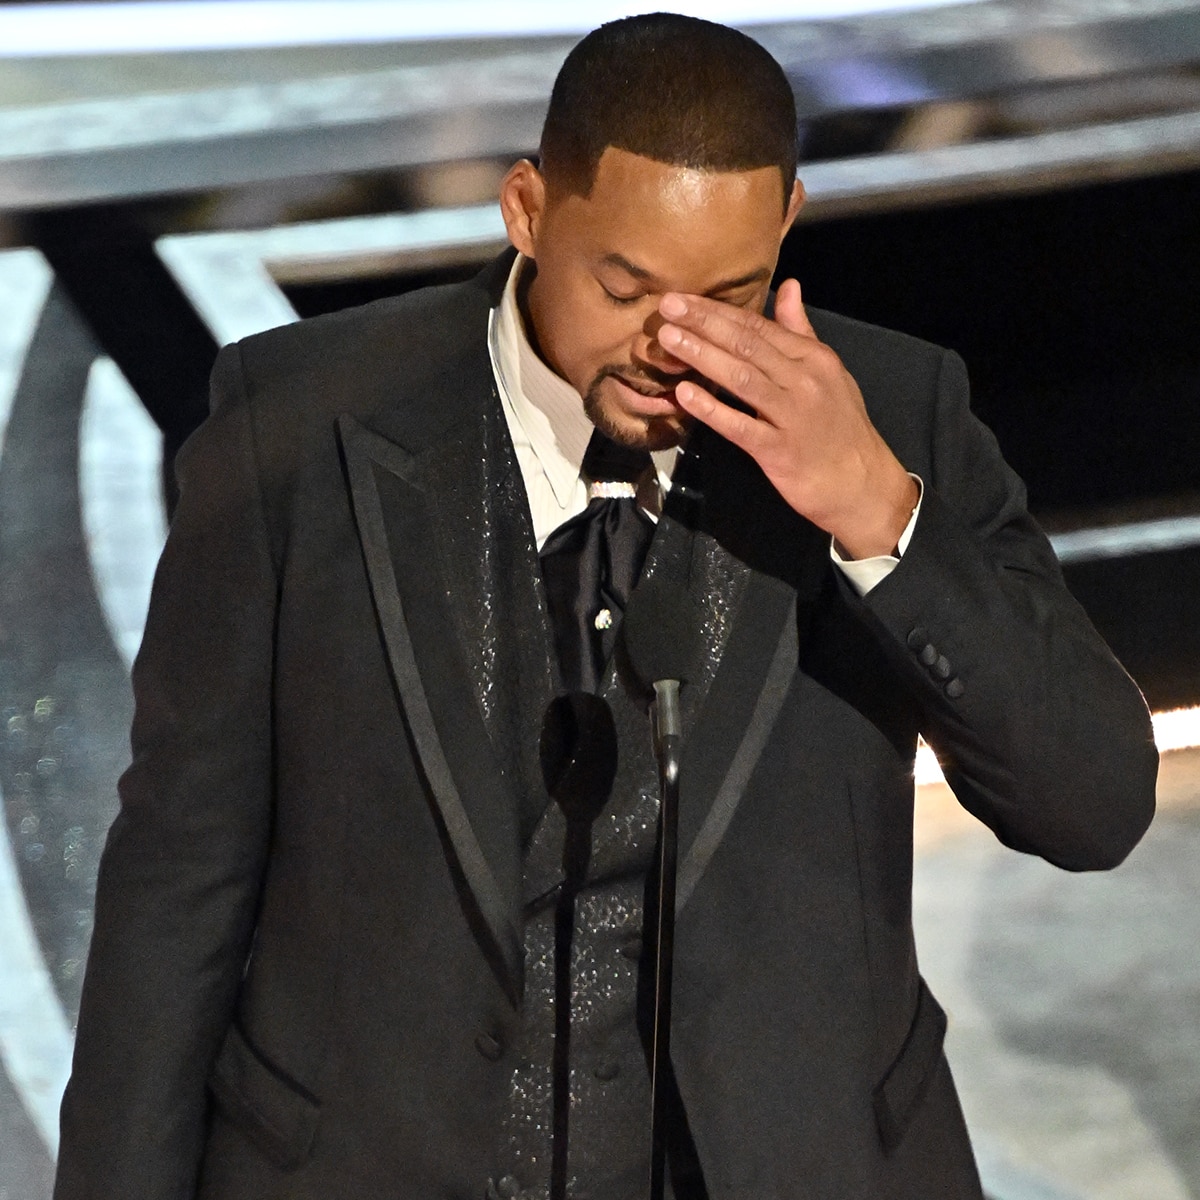 Oscars 2022: Emotional Will Smith Apologizes After Chris Rock Altercation